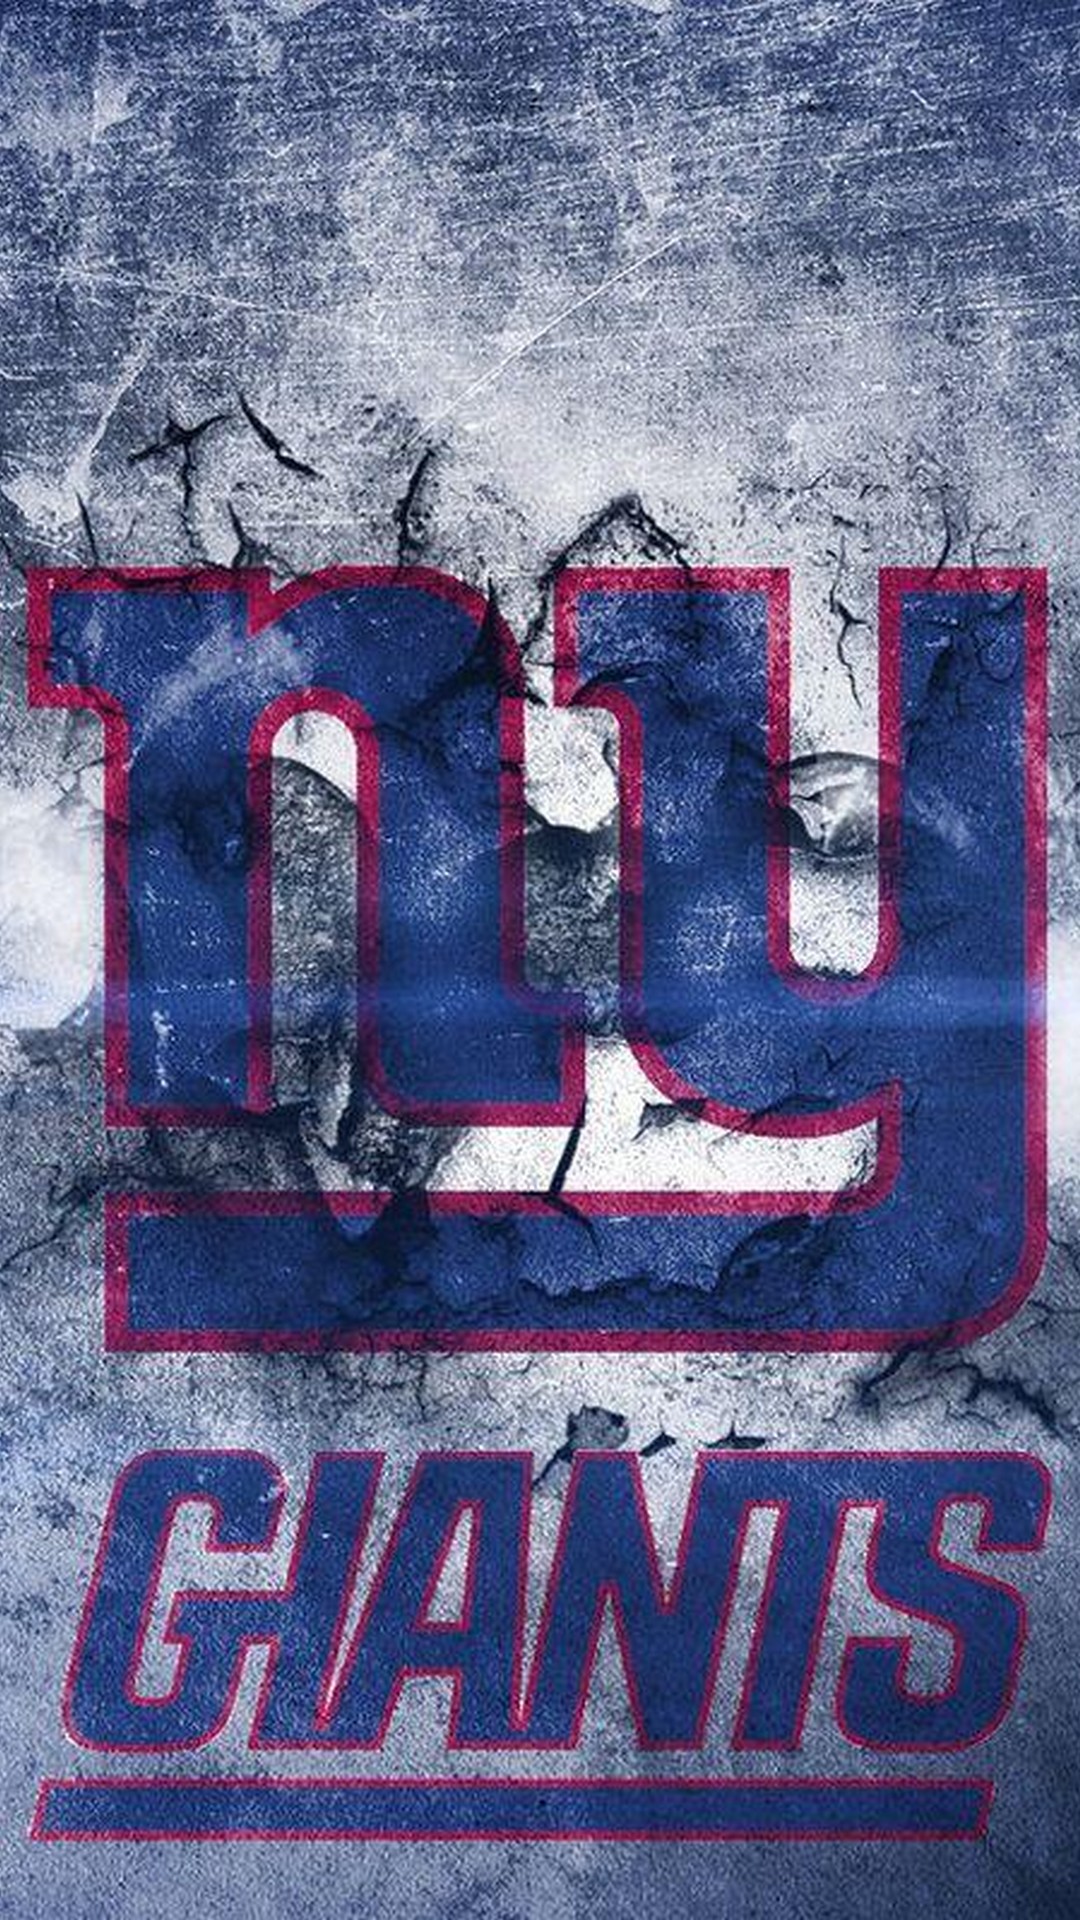 New York Giants iPhone Wallpaper Lock Screen with high-resolution 1080x1920 pixel. Download and set as wallpaper for Desktop Computer, Apple iPhone X, XS Max, XR, 8, 7, 6, SE, iPad, Android